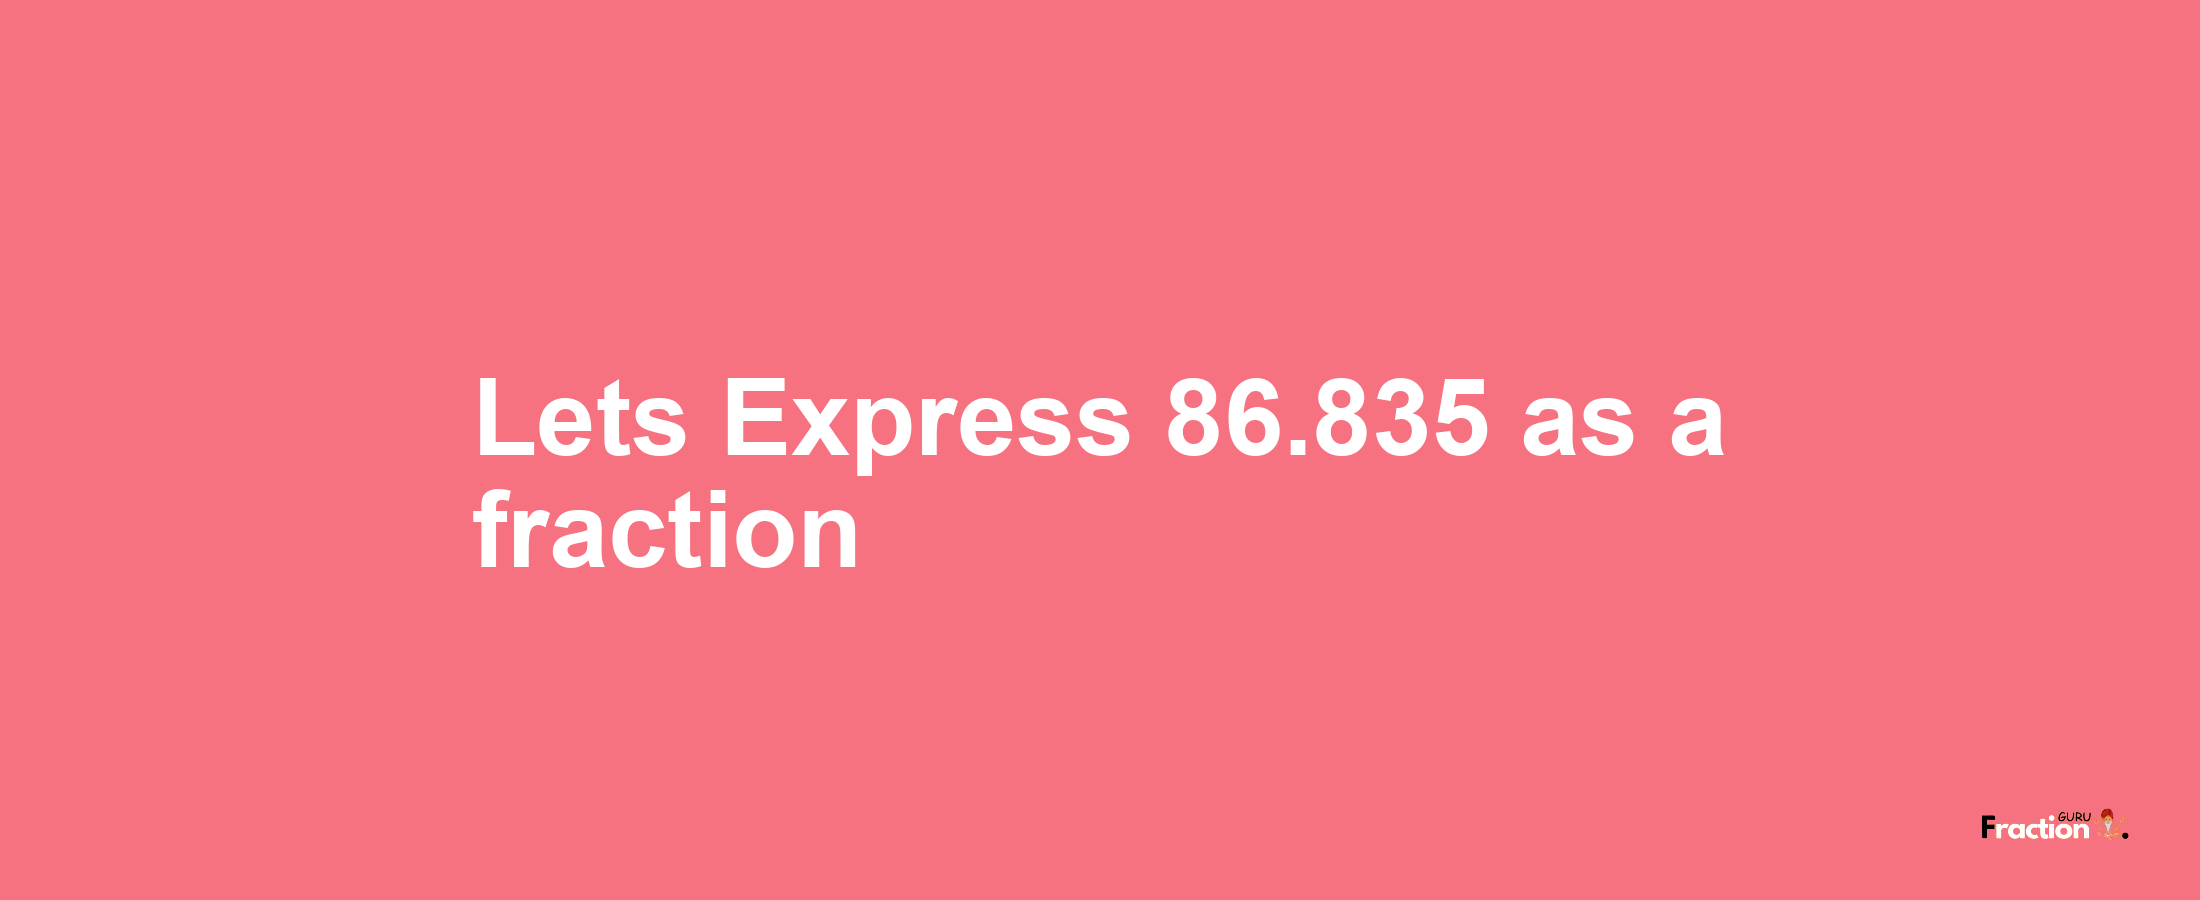 Lets Express 86.835 as afraction